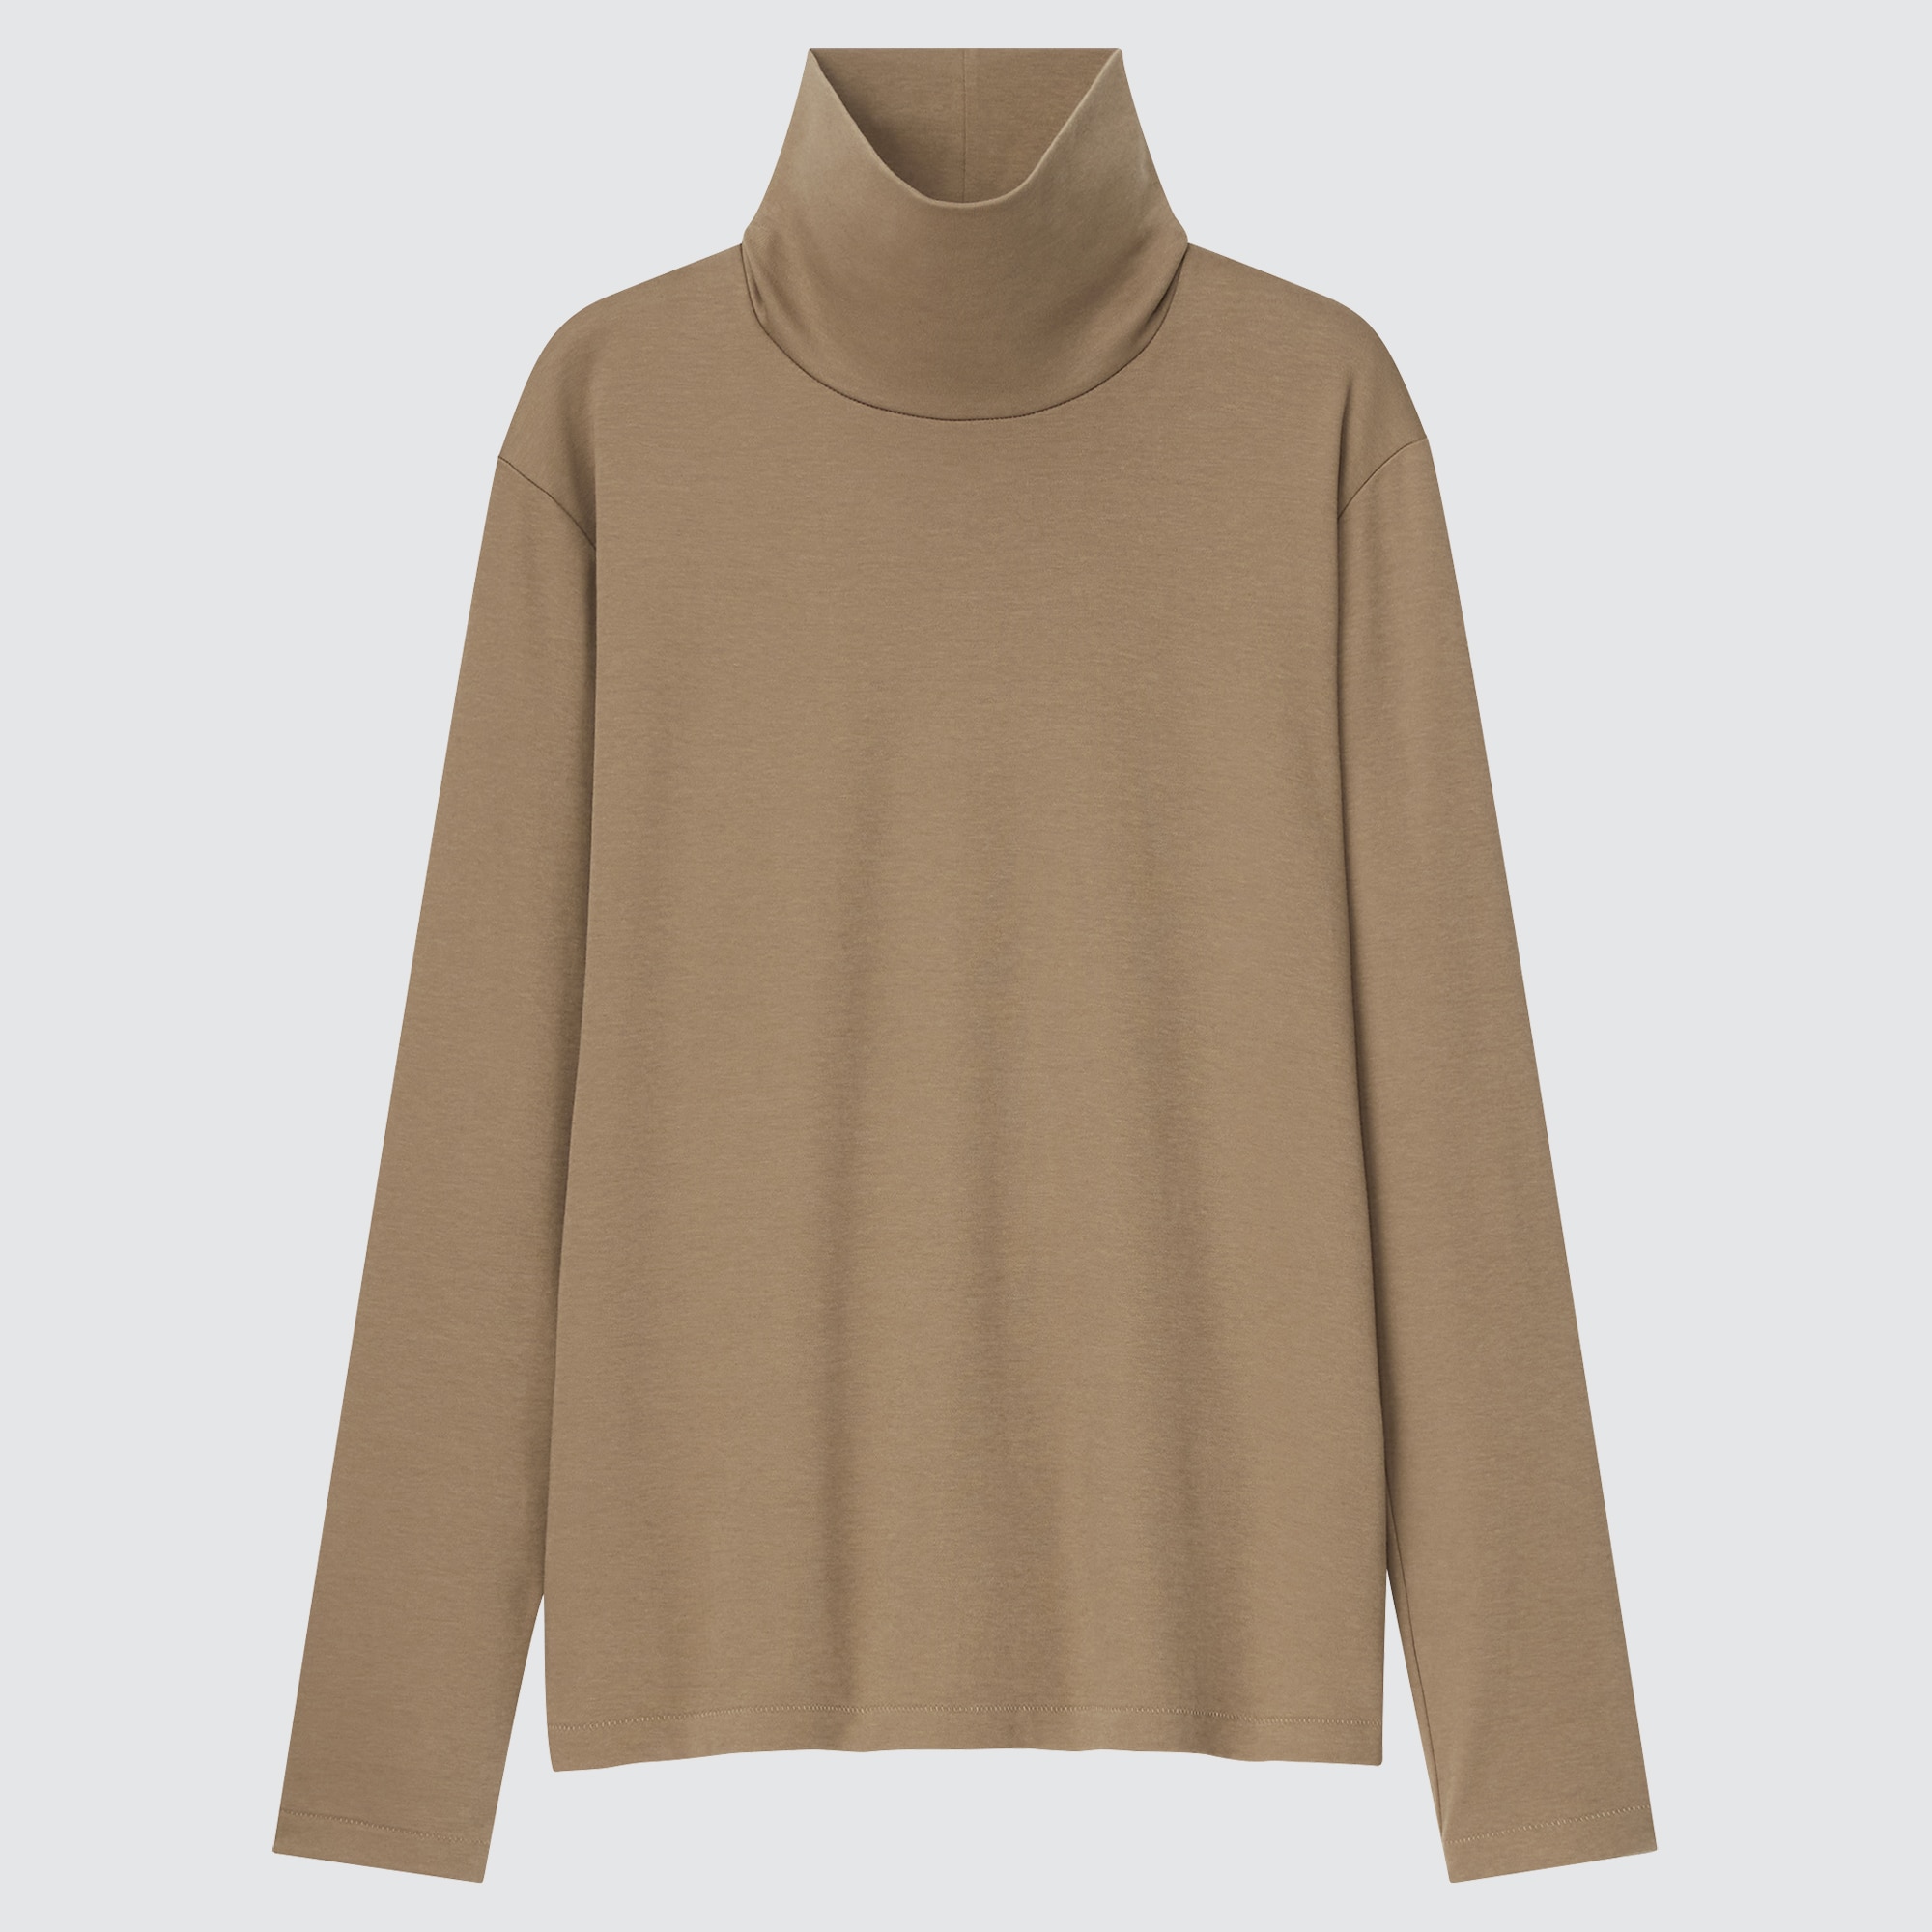 UNIQLO Smooth Stretch Cotton Turtleneck Long-Sleeve T-Shirt | StyleHint